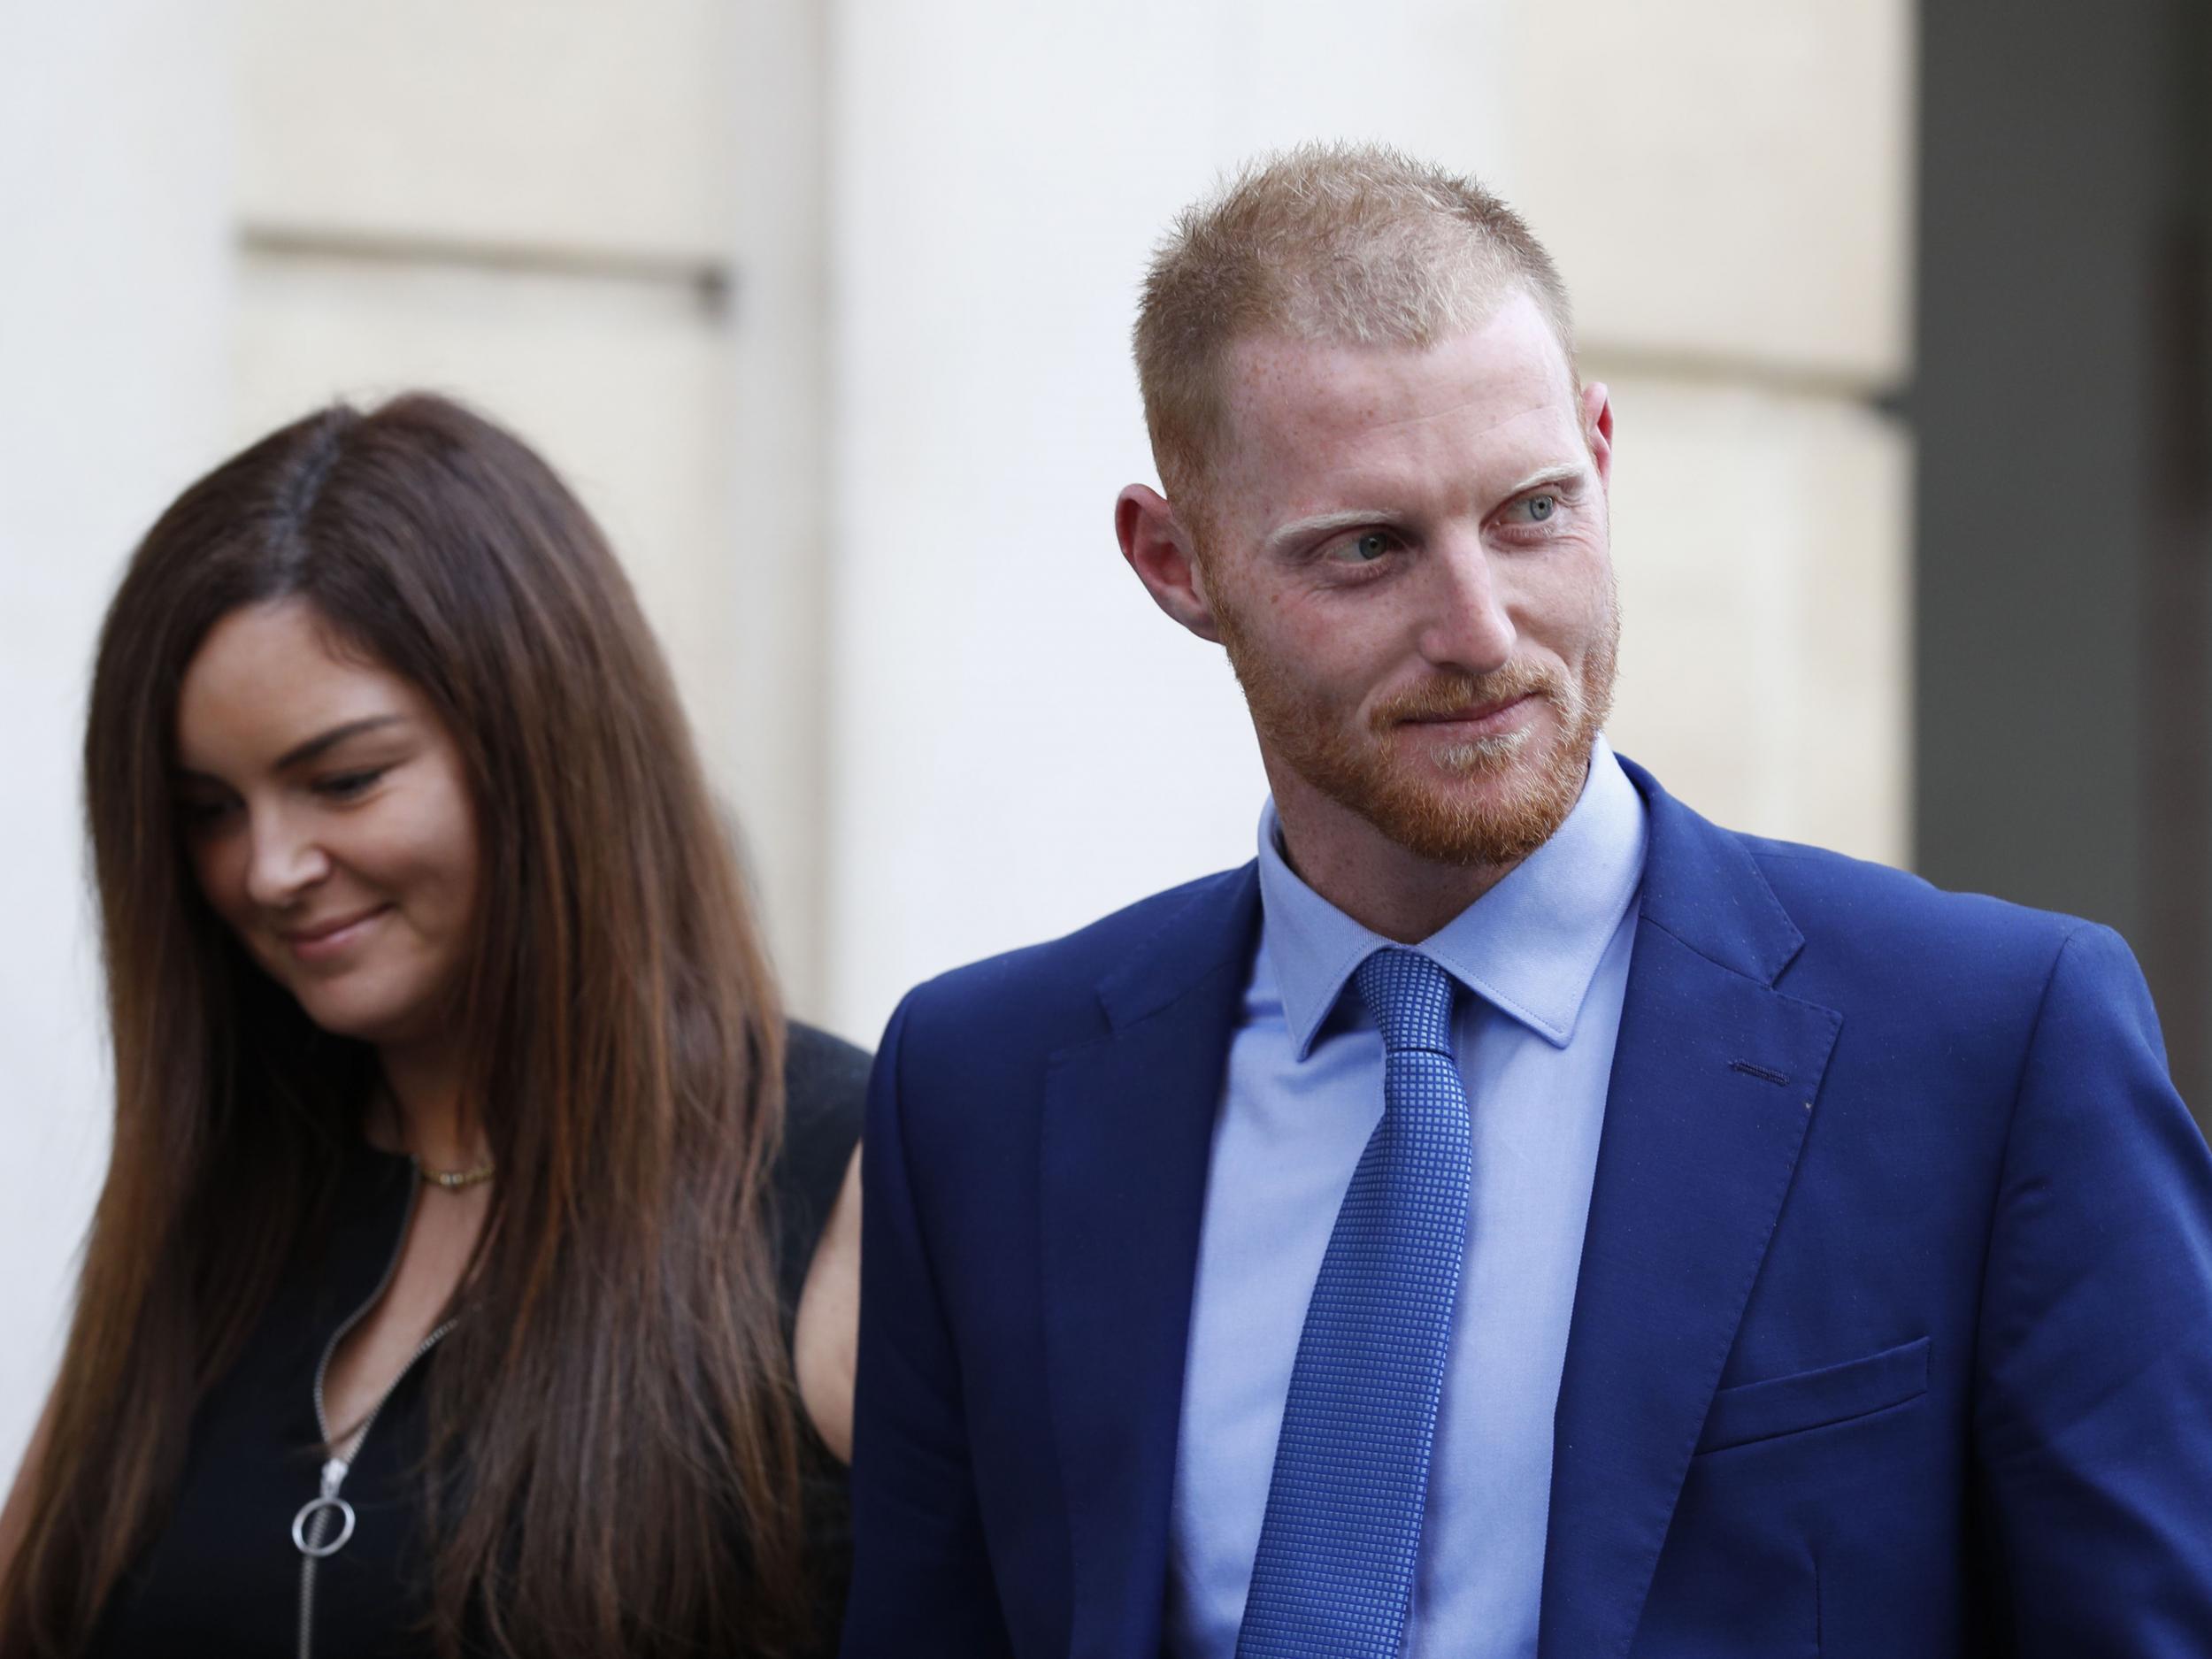 England cricketer Ben Stokes and his wife Clare leave Bristol Crown Court as the trial broke for the day